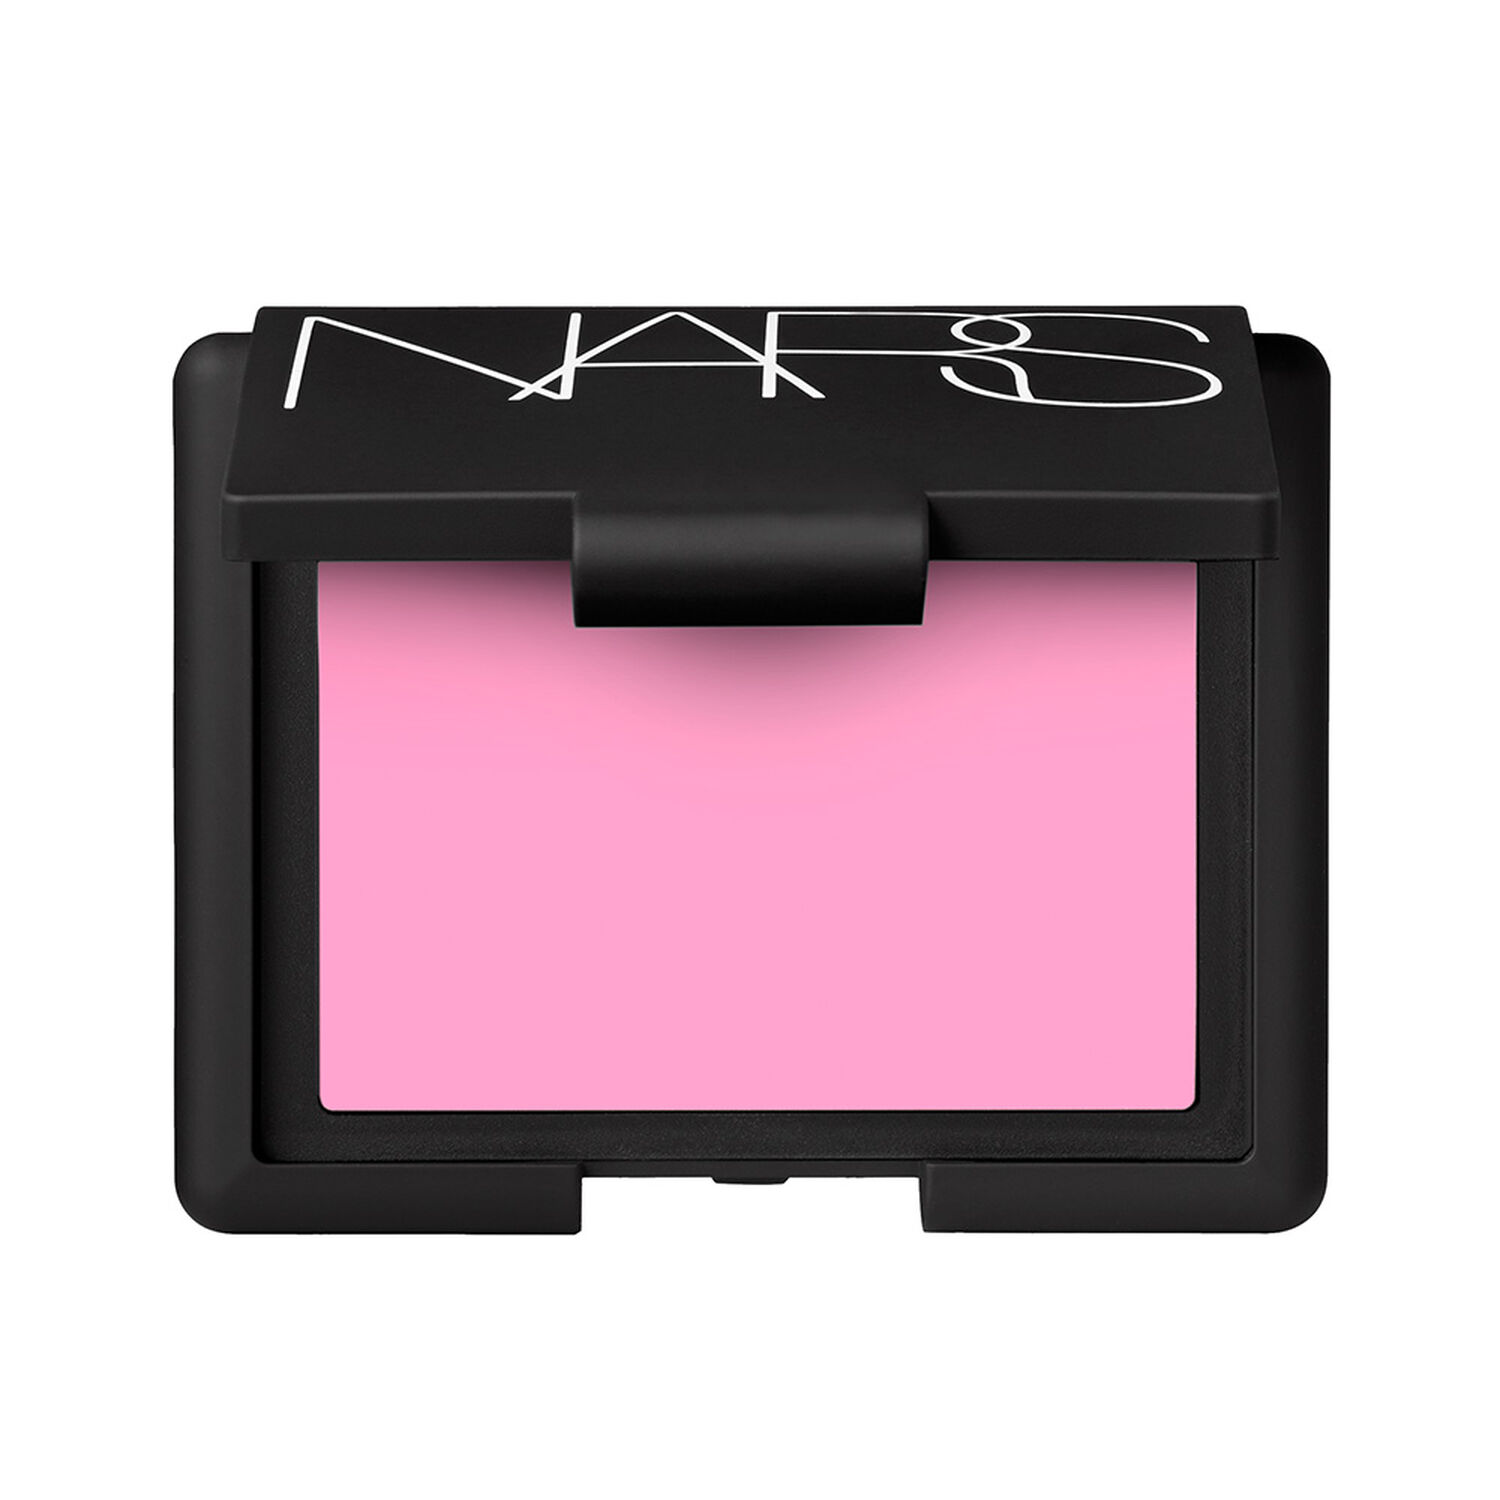 NARS Thrill Powder Blush Review & Swatches